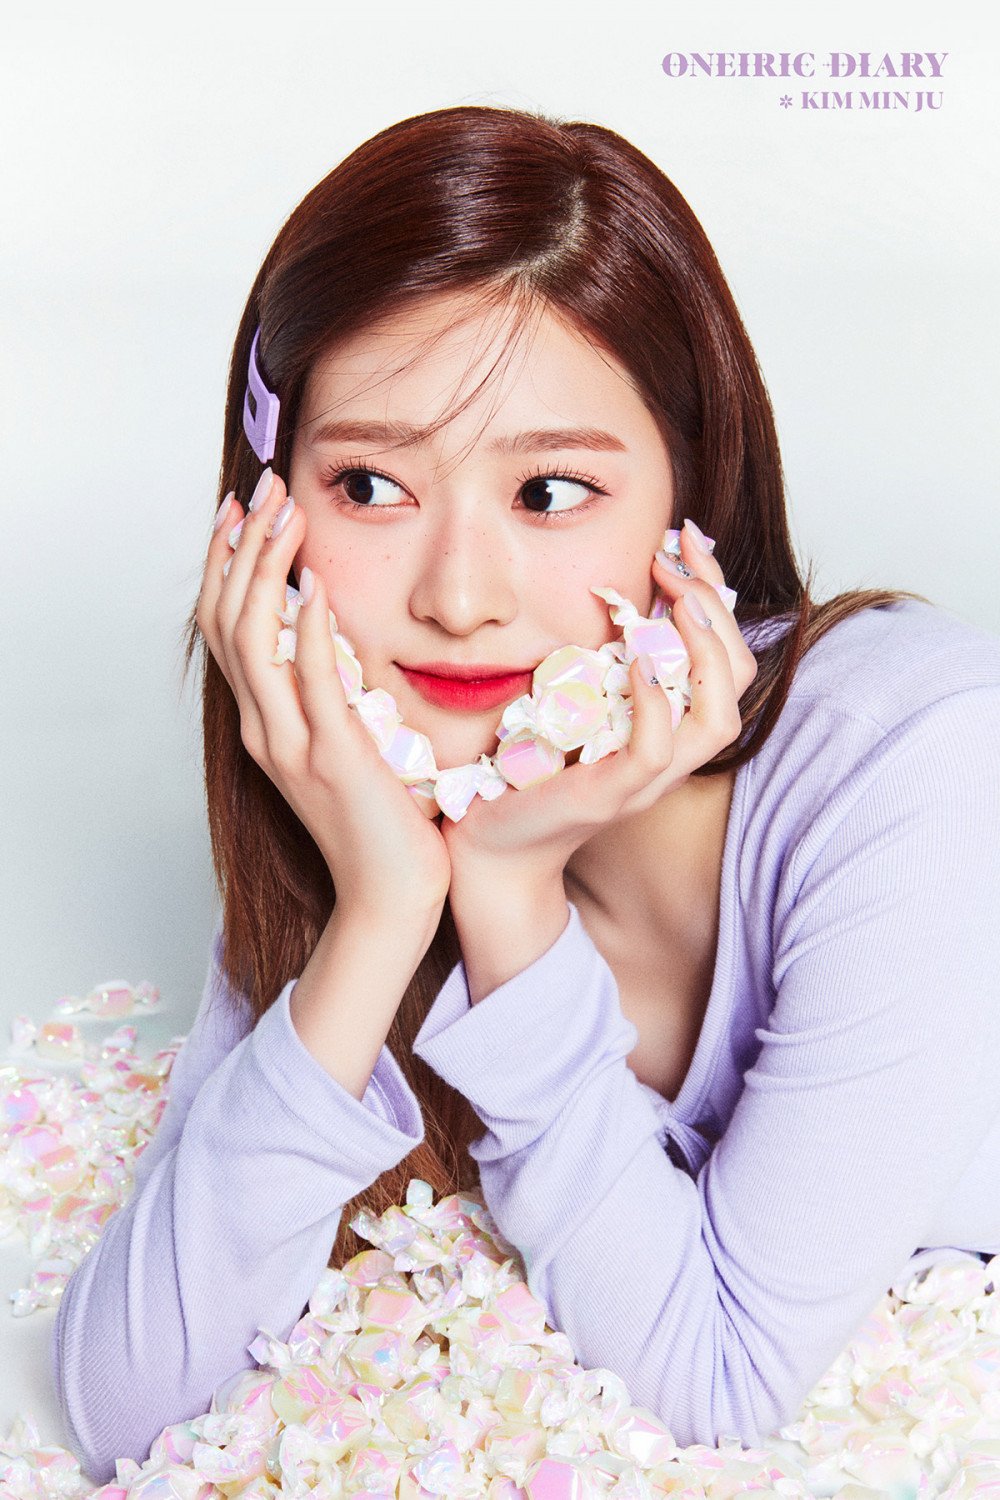 izone-release-lovely-first-set-of-oneiric-diary-concept-photos-6